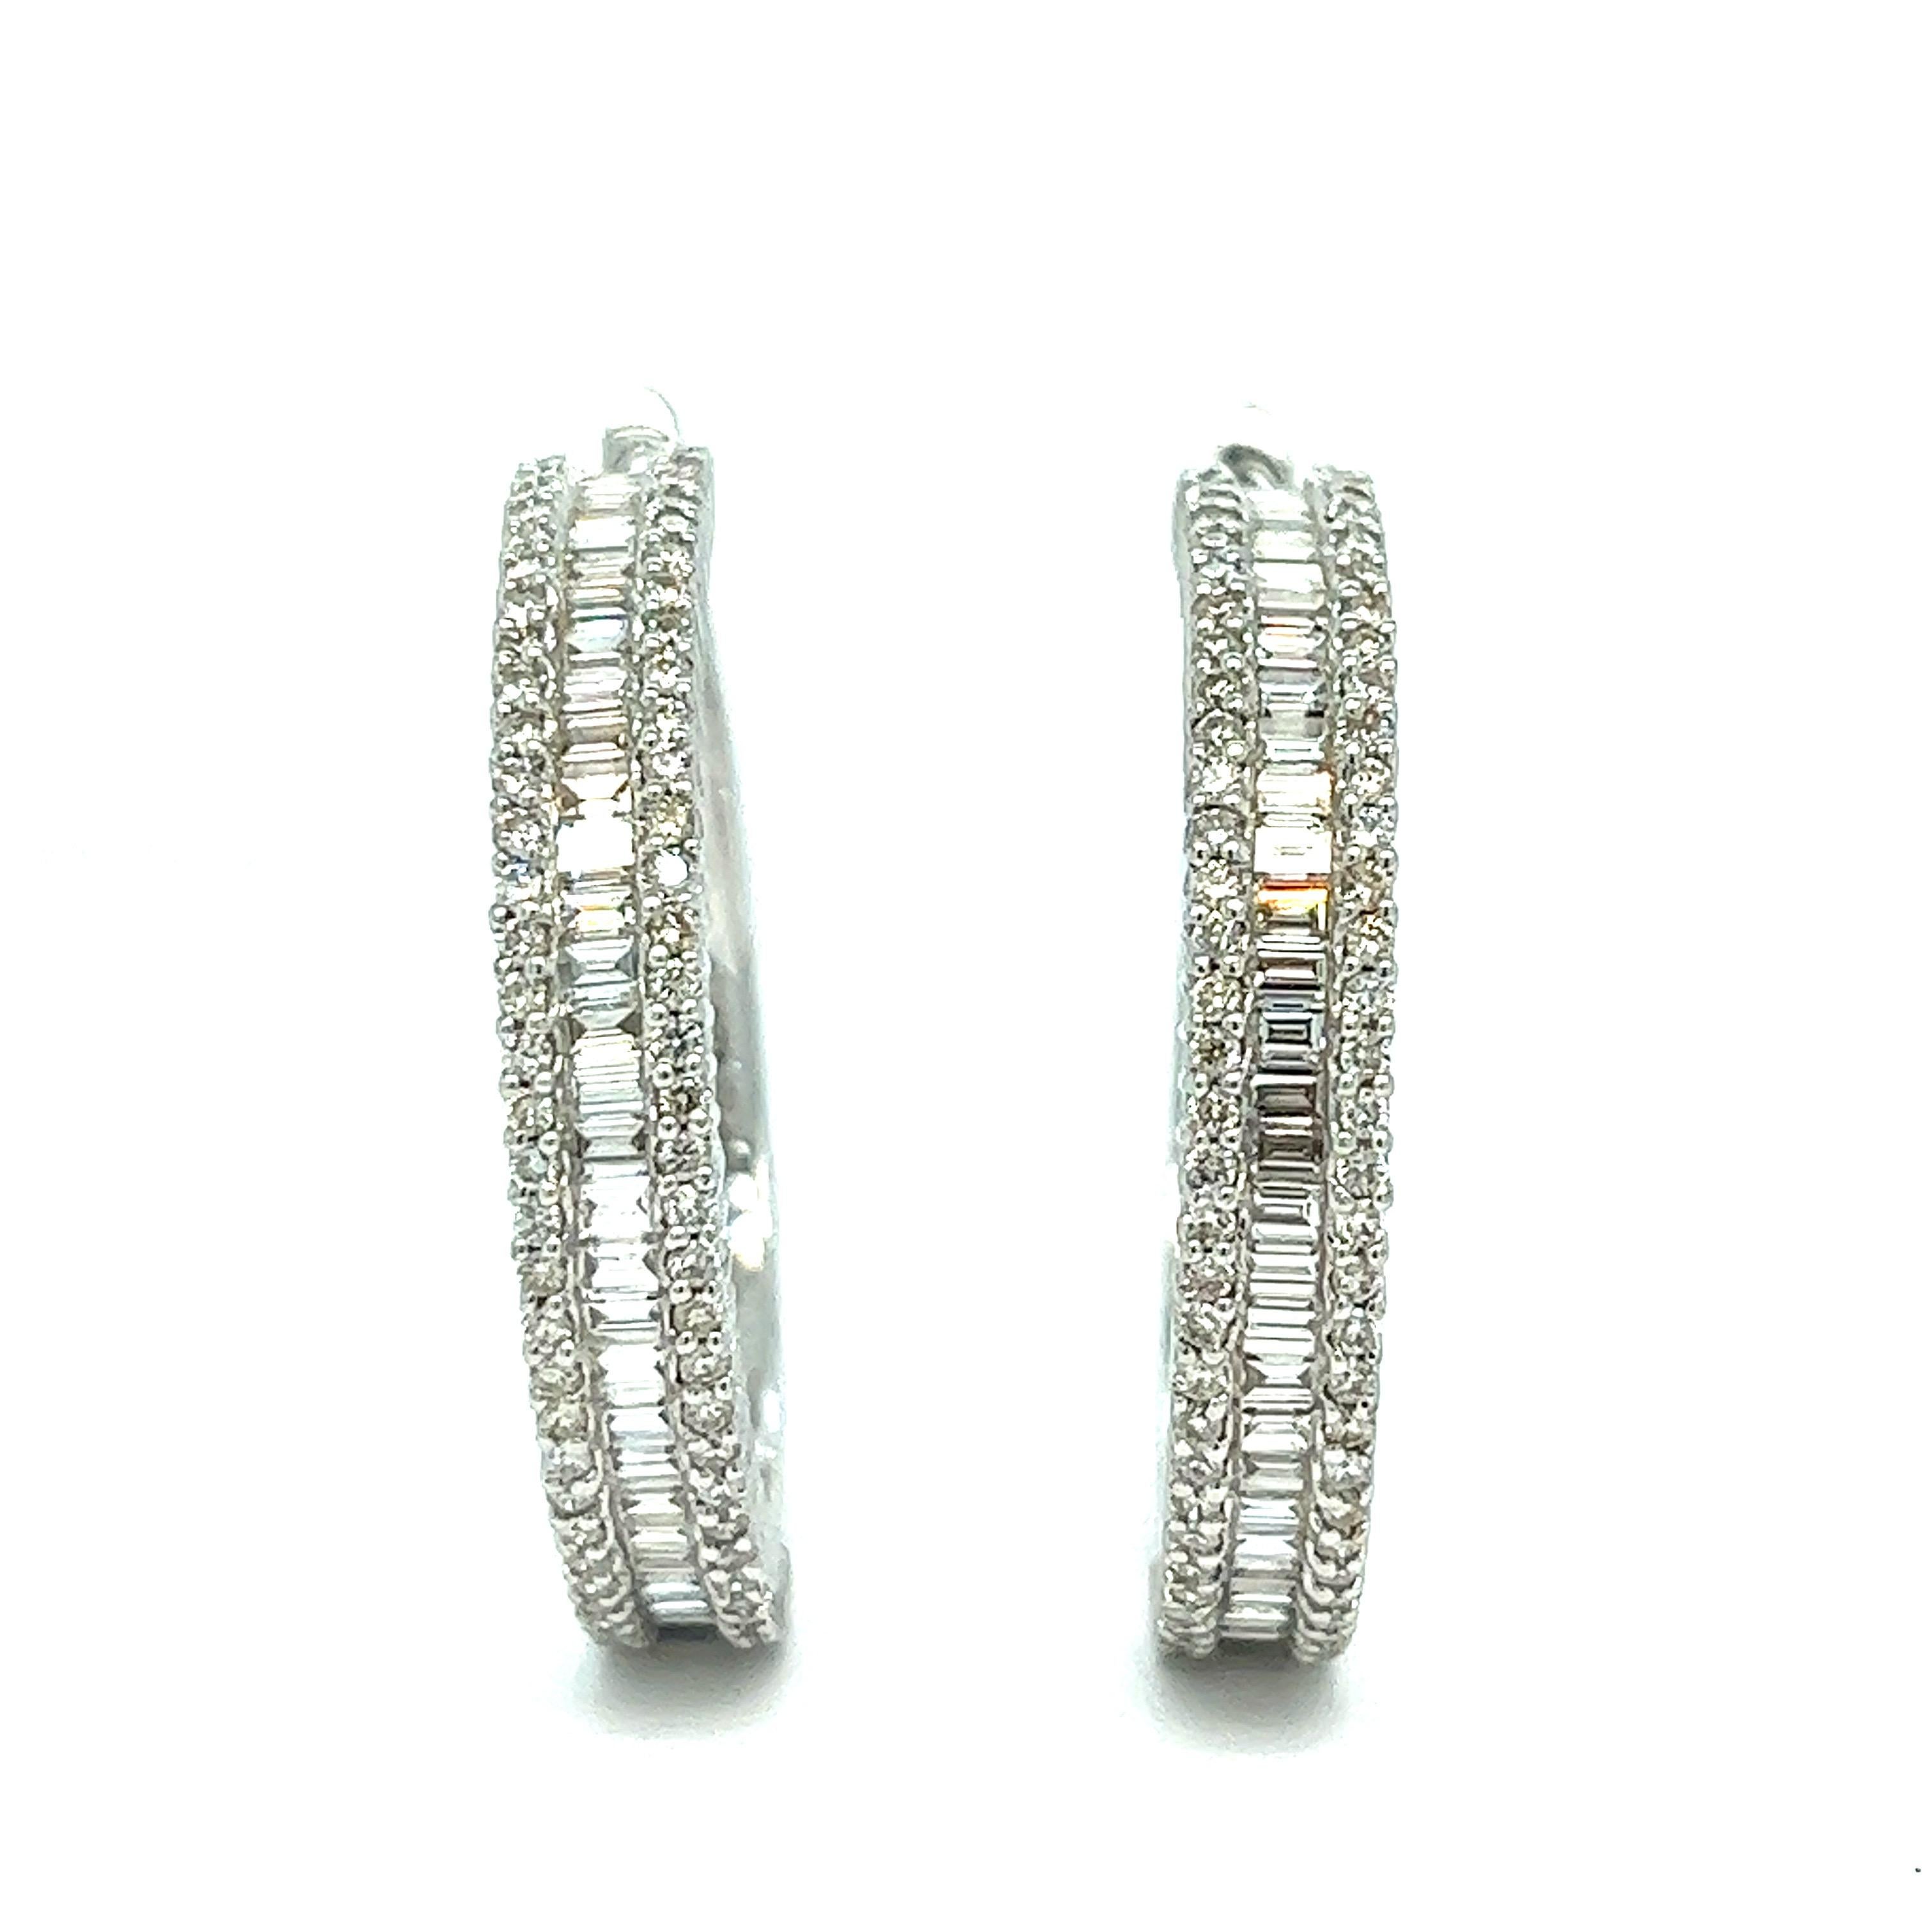 Diamond hoop white gold earrings, made in Italy

Very white and clean baguette- and round-cut diamonds of 3.28 carats, 18 karat white gold; marked K18, D328

Size: width 0.5 cm, diameter 3.2 cm
Total weight: 13.1 grams